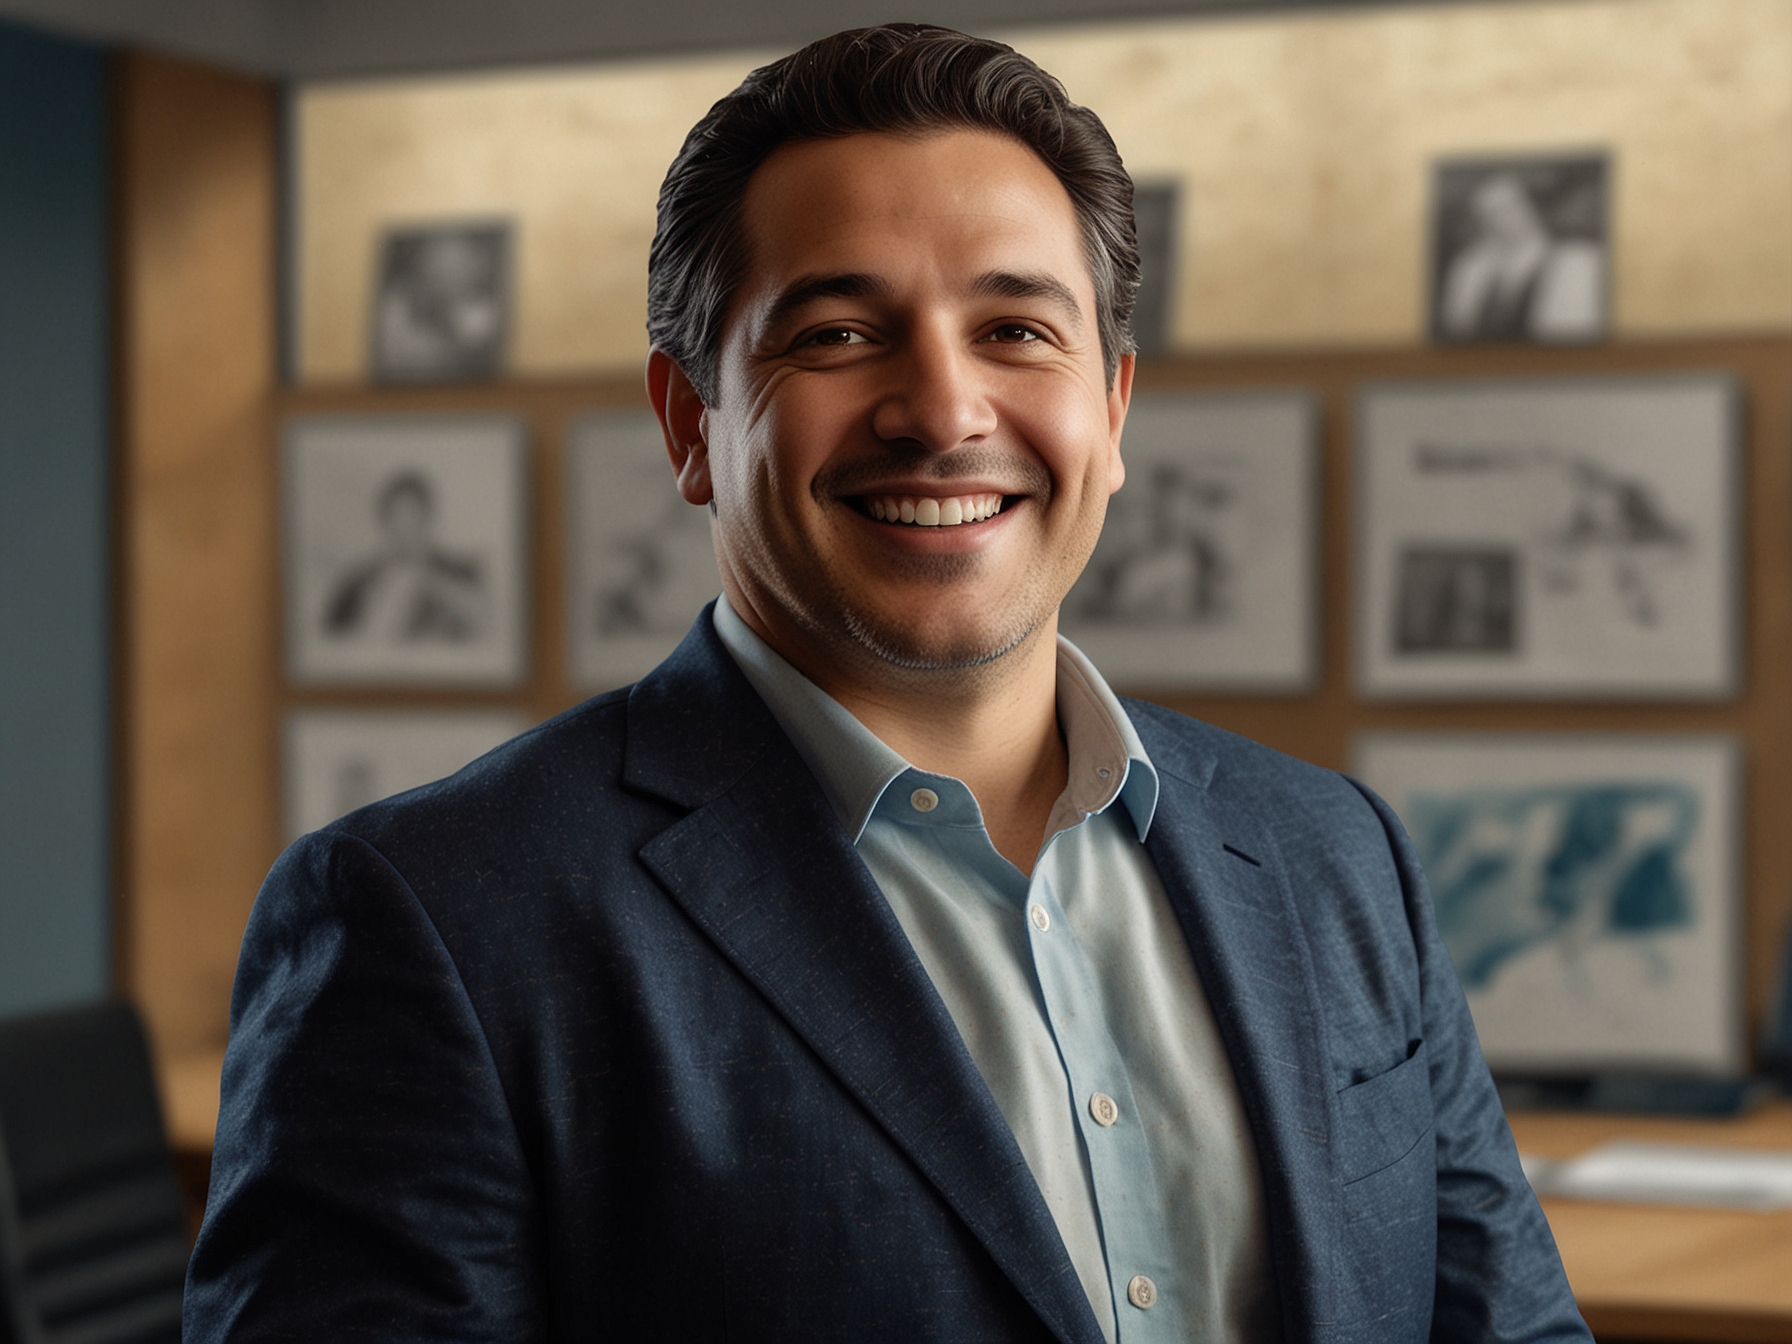 Andres Alvarez stands smiling in an office setting, symbolizing his new role as head of Paramount Pictures' home entertainment division, reflecting the company's fresh strategic direction.